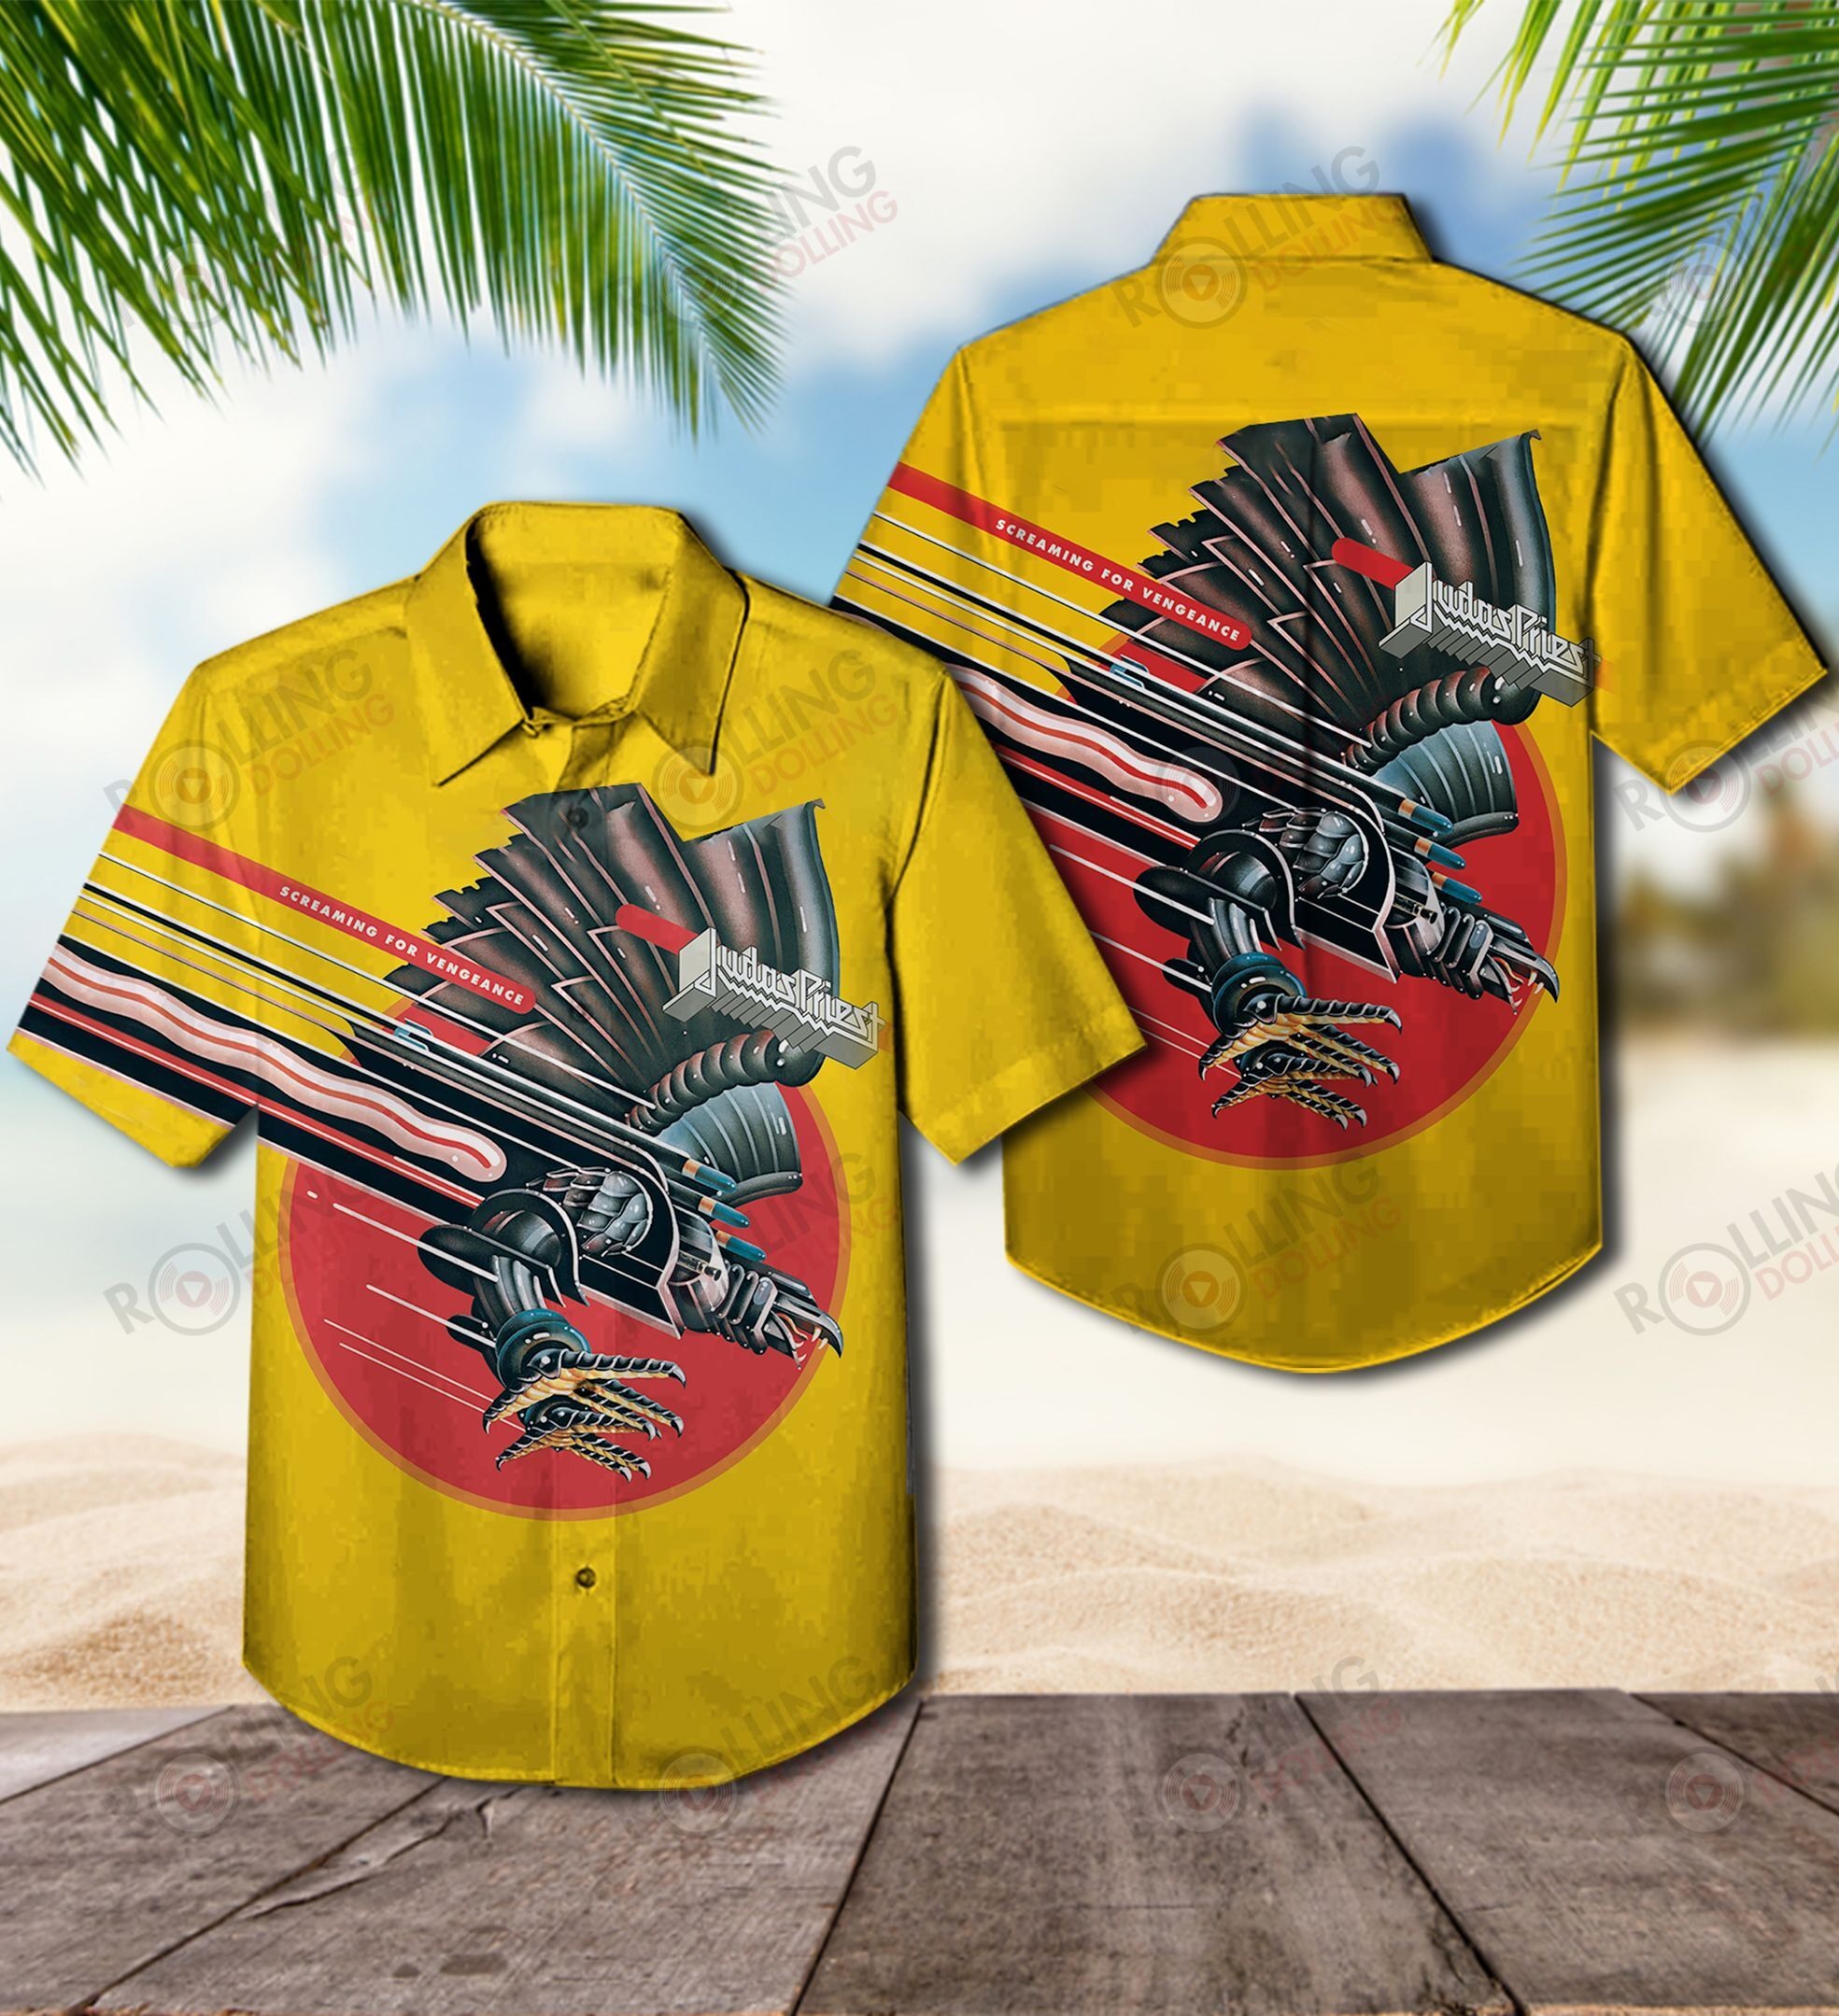 For summer, consider wearing This Amazing Hawaiian Shirt shirt in our store 88